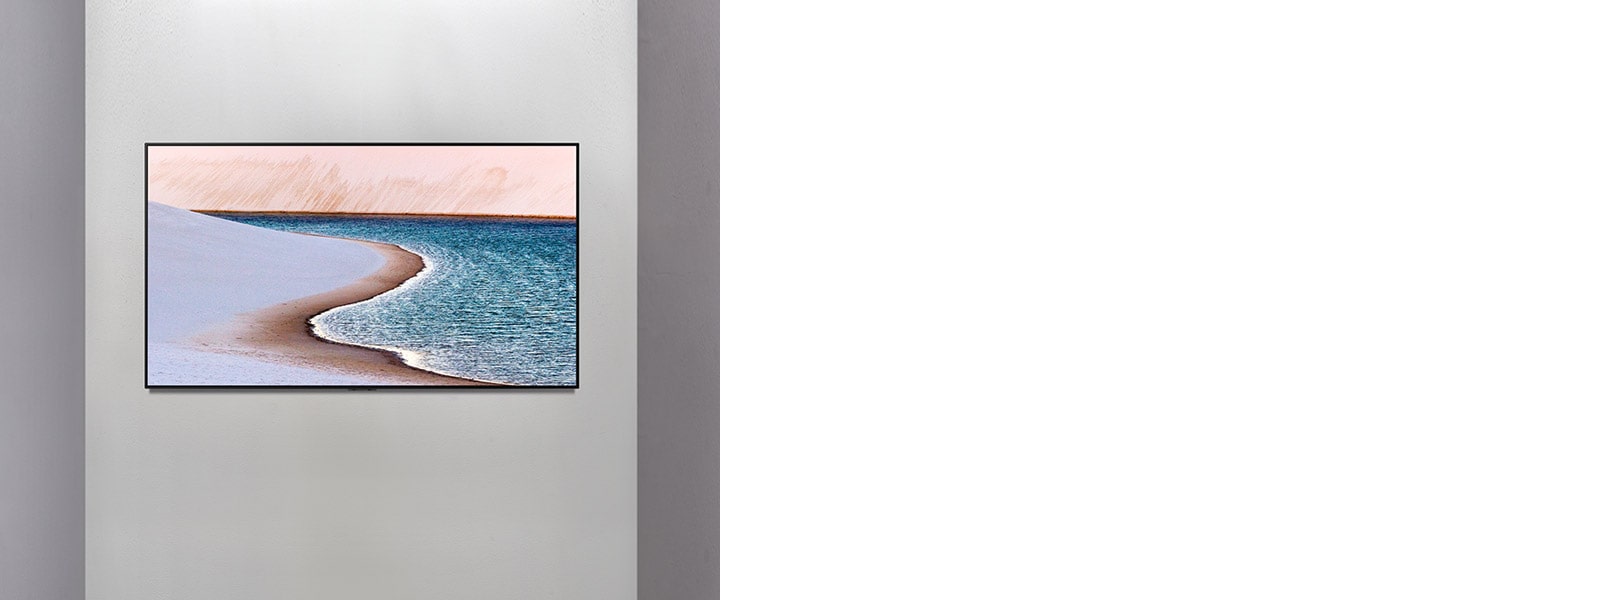 TV on a wall showing an image of the seashore